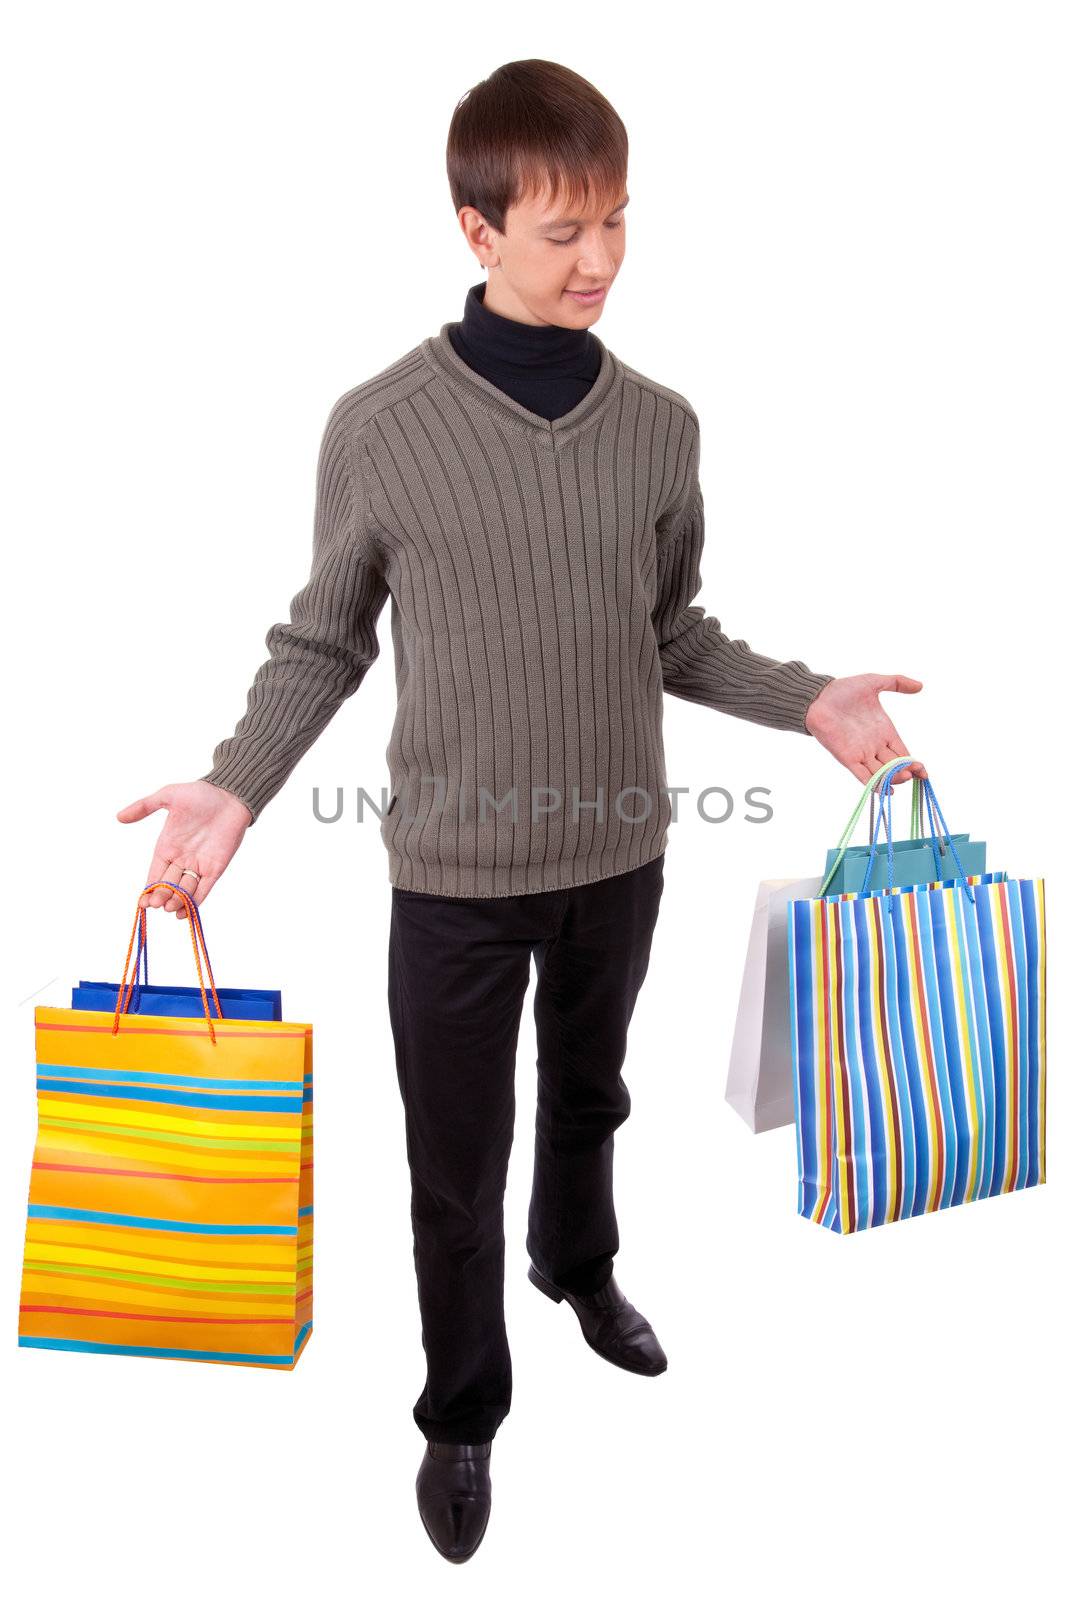 young man  handing gift bags on white background